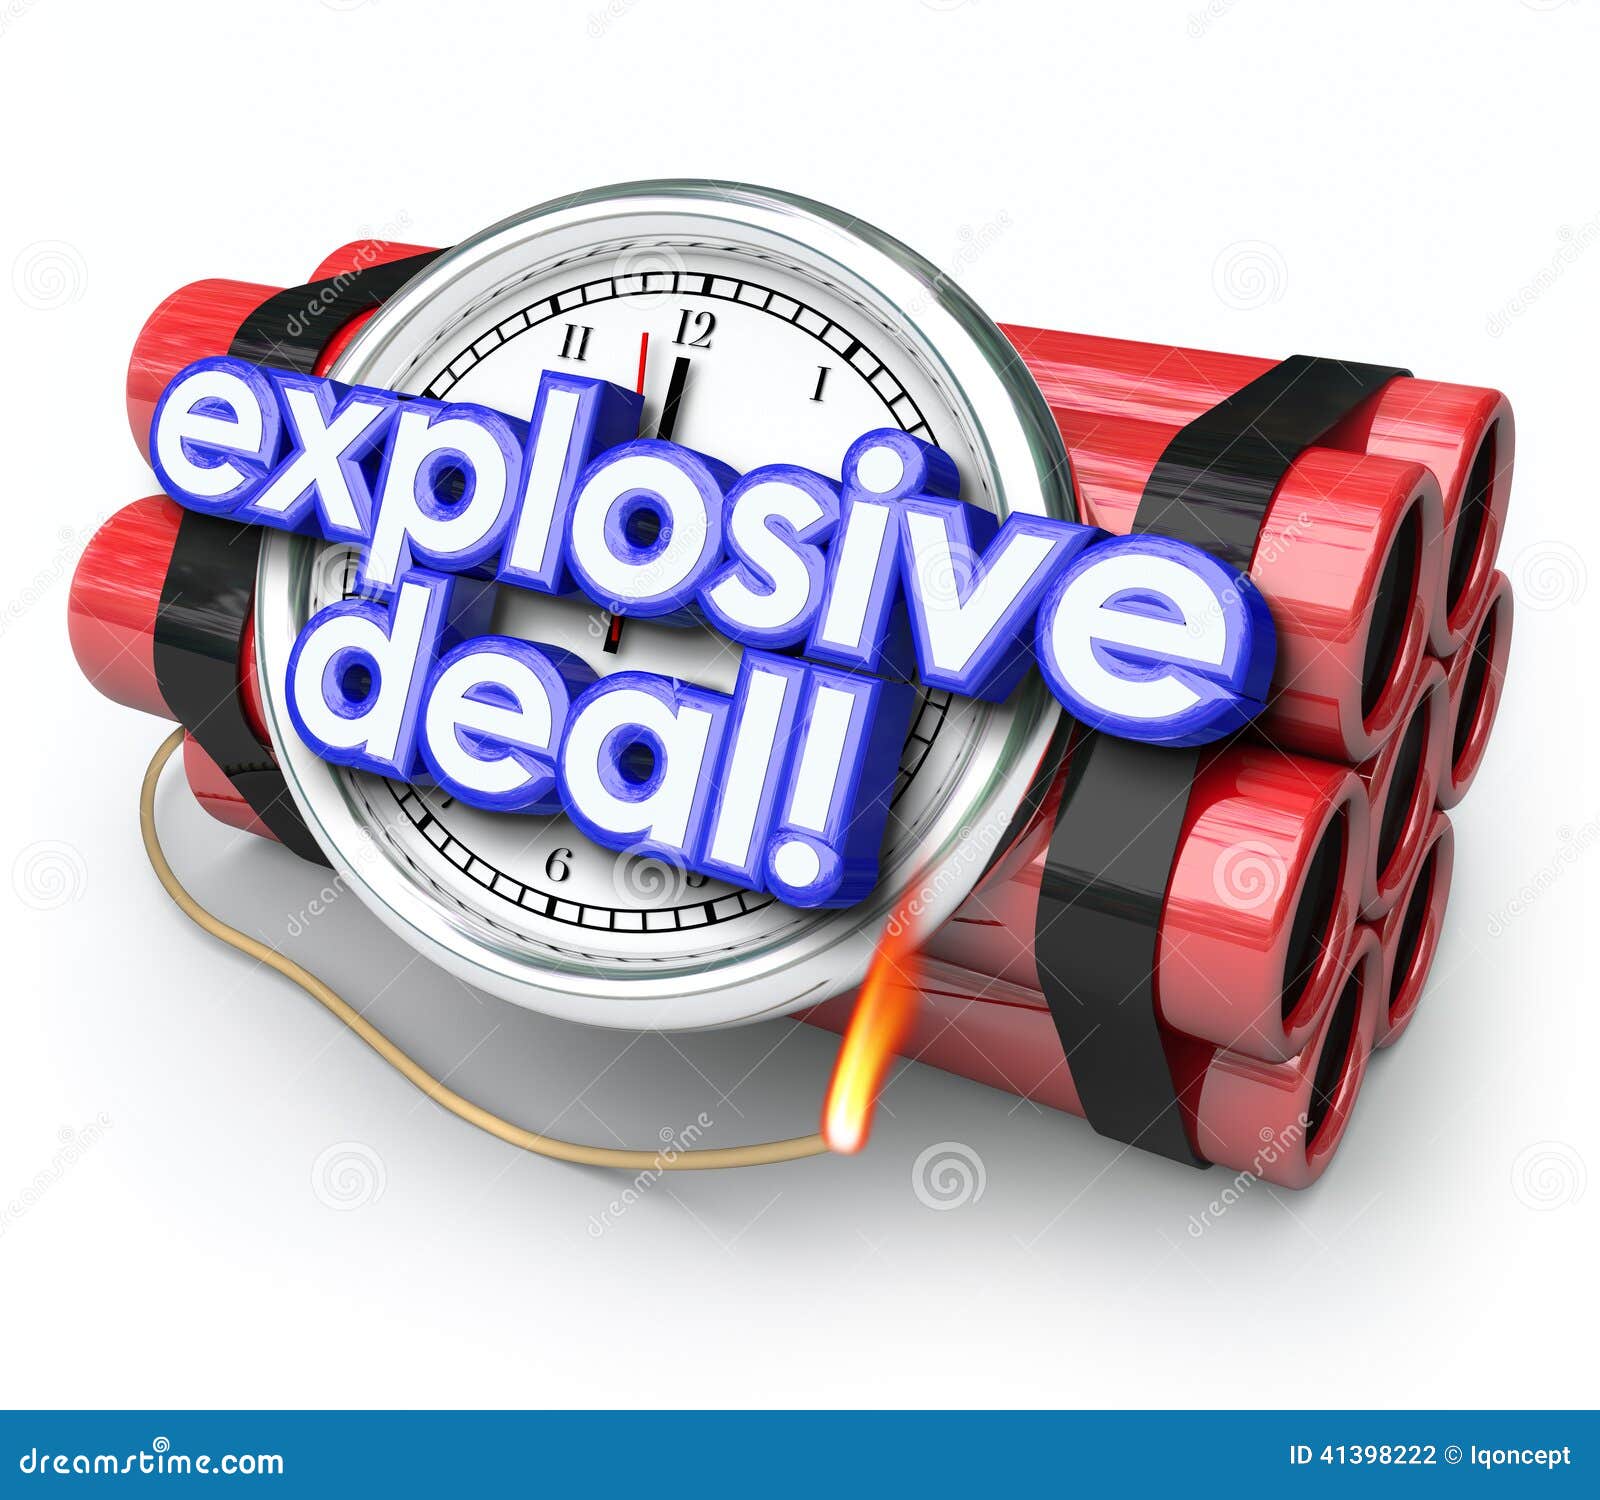 explosive deals bomb dynamite special sale clearance price